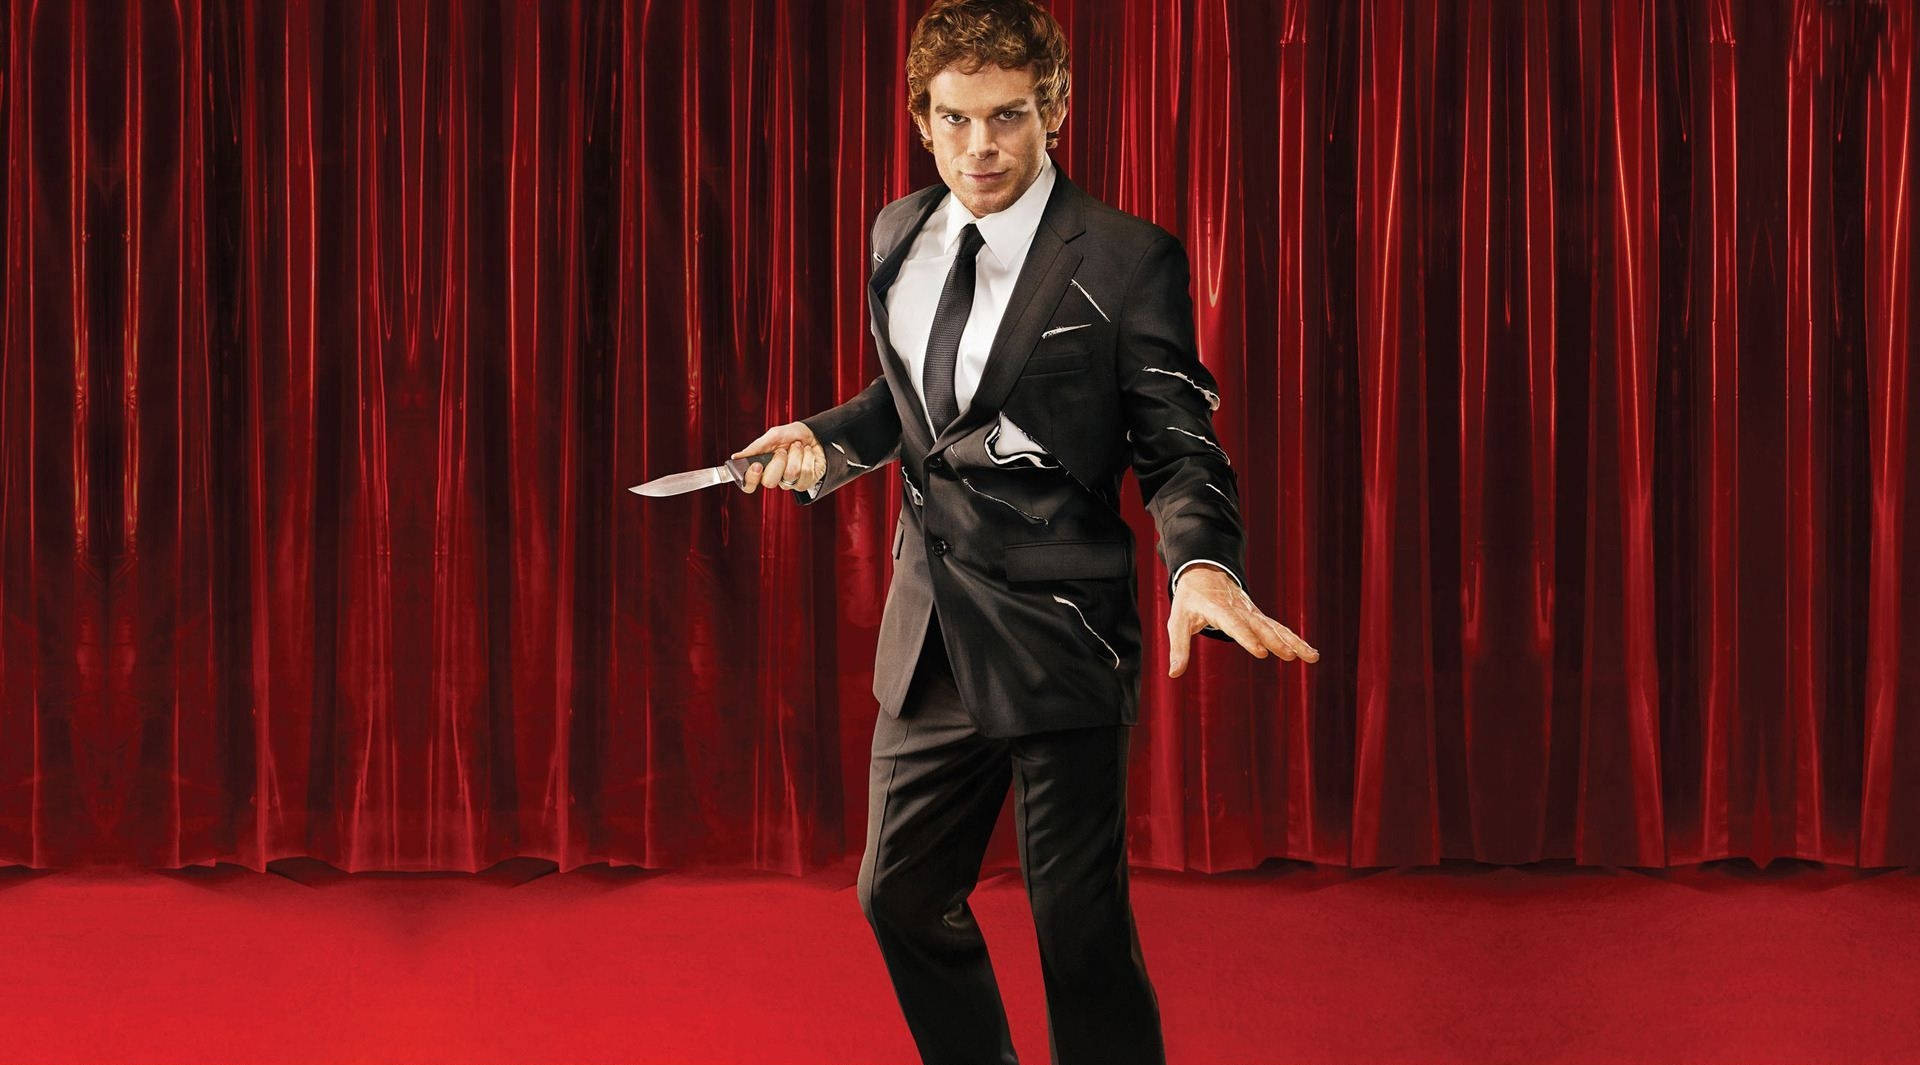 Dexter Morgan - Consummate Professional Against a Red Curtain Background Wallpaper